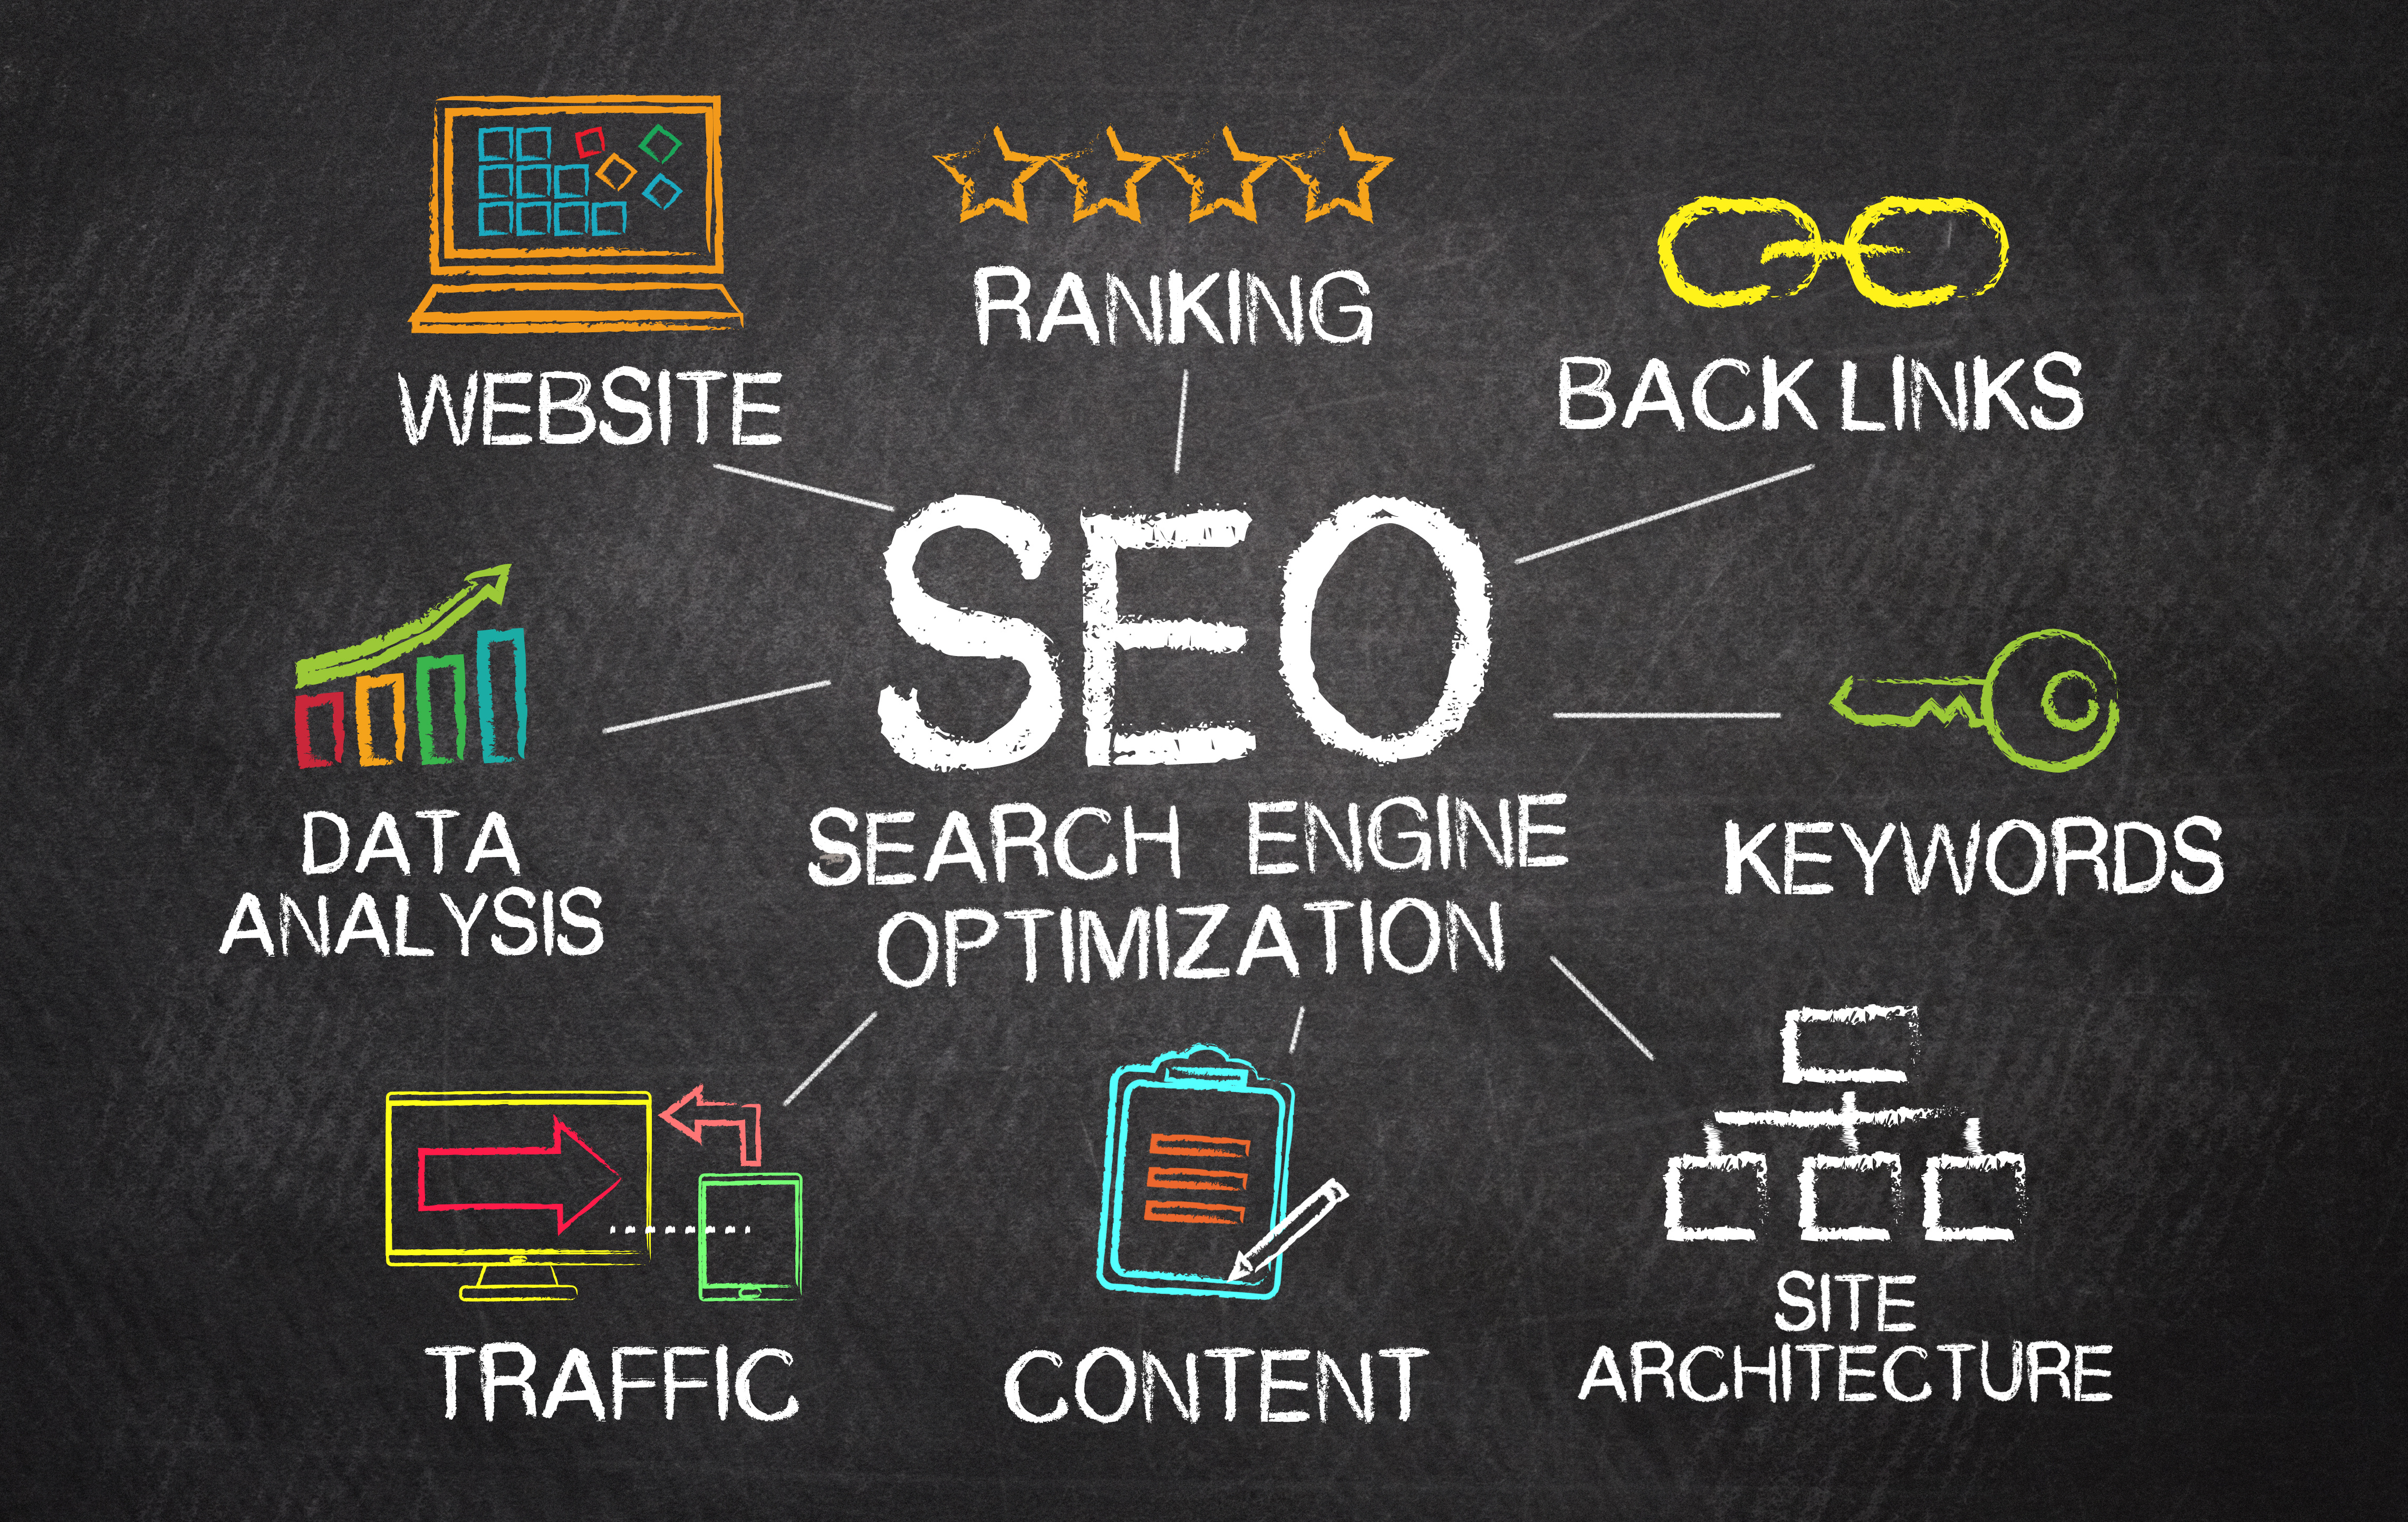 SEO Ranking Back links Keywords Site Architecture Content Traffic Data Analysis Website